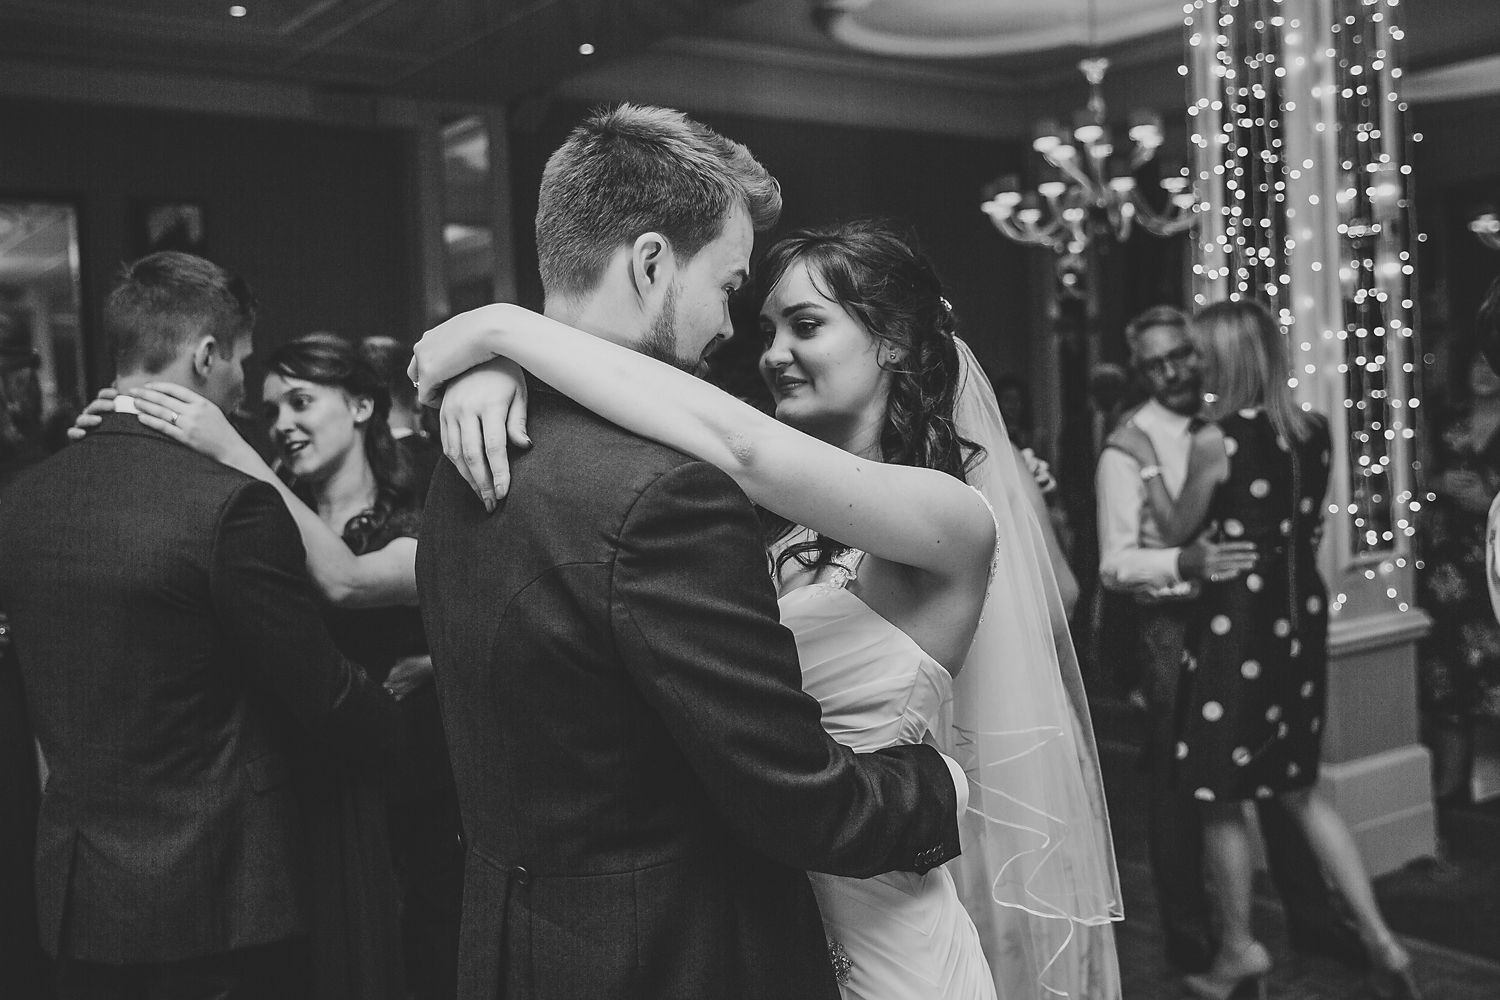 Black and white wedding photos of bride and groom dancing on the dance floor in a hotel.